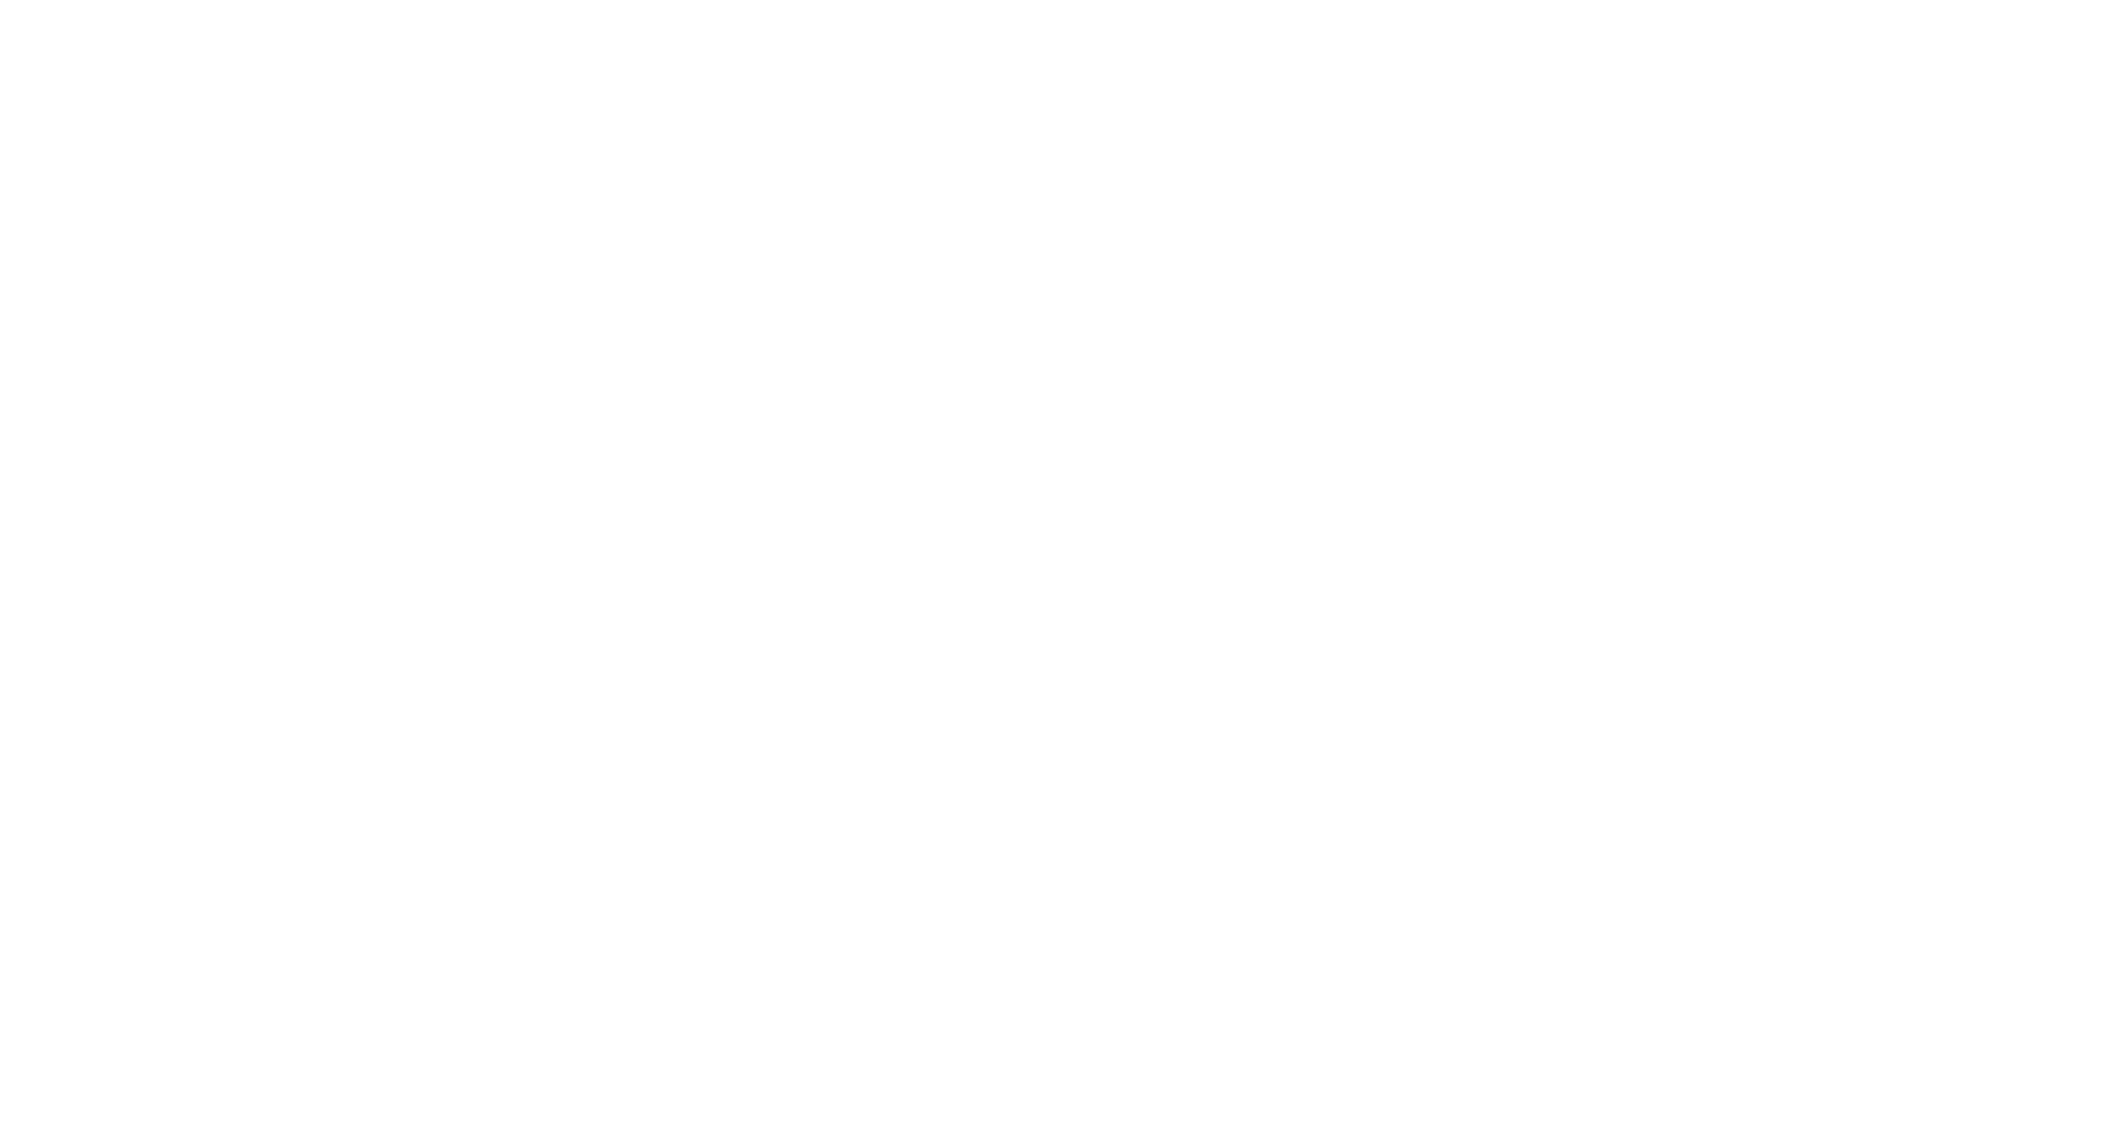 A Place for Mom